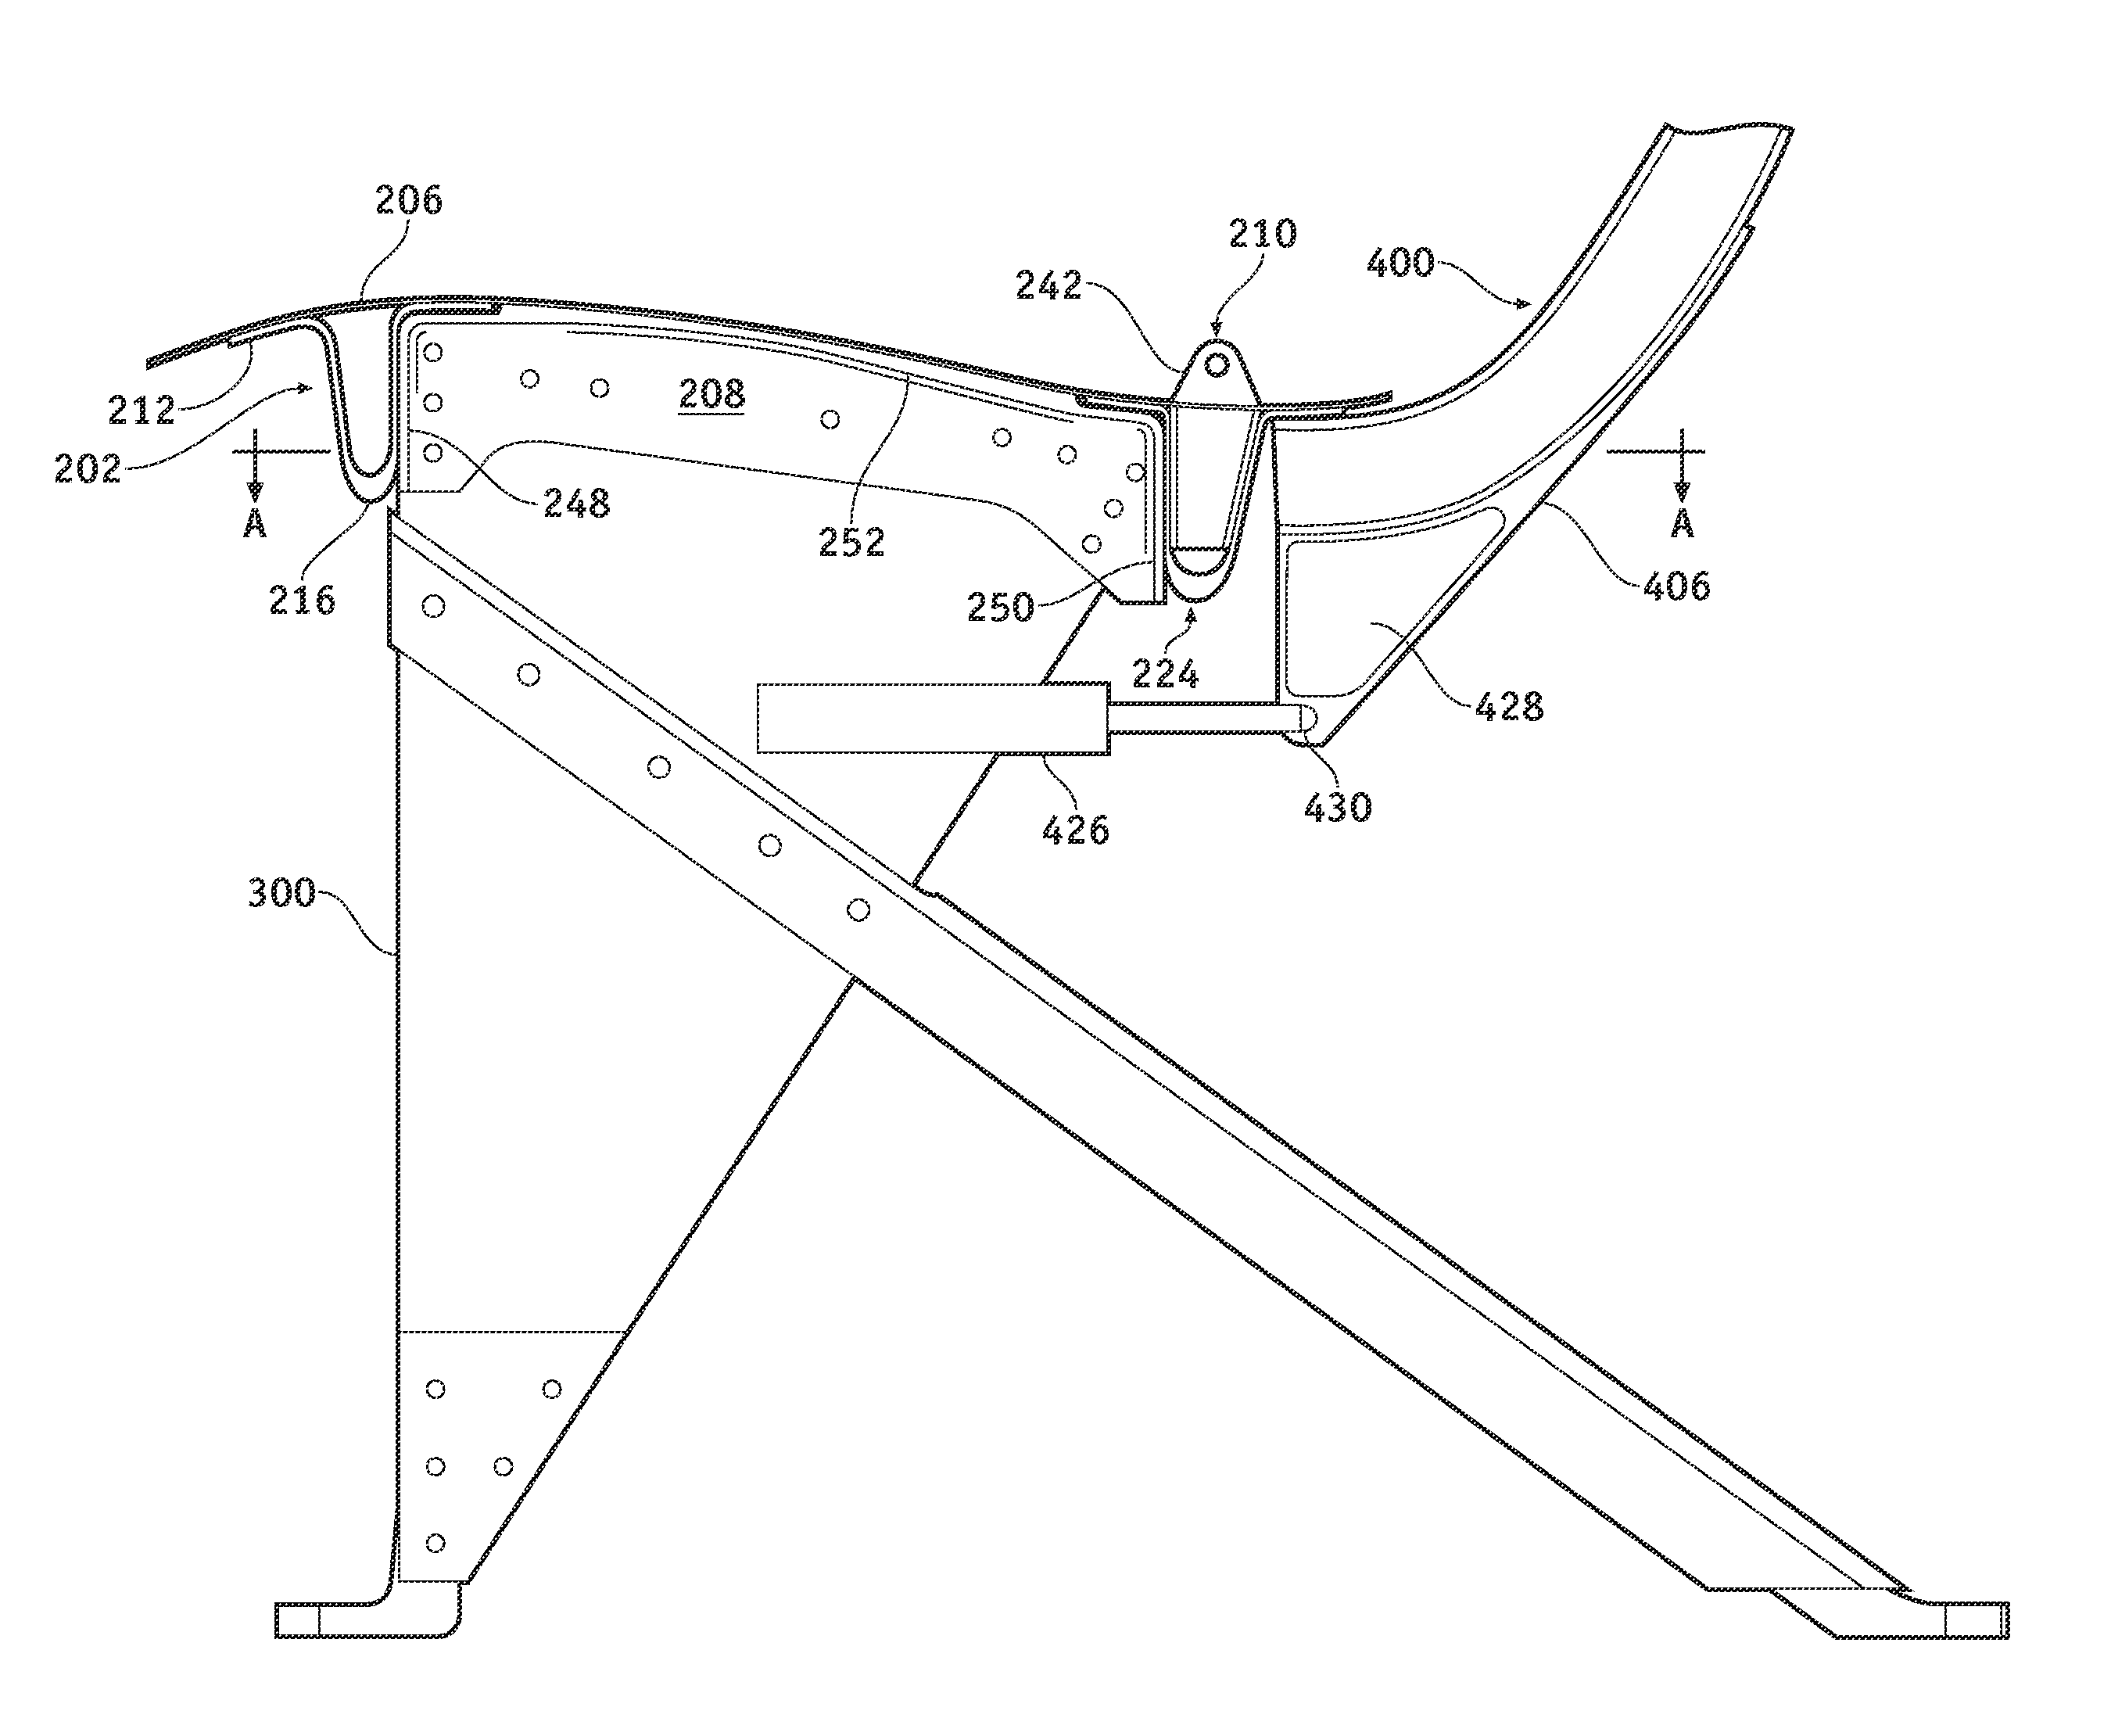 Composite leg structure for a lightweight aircraft seat assembly